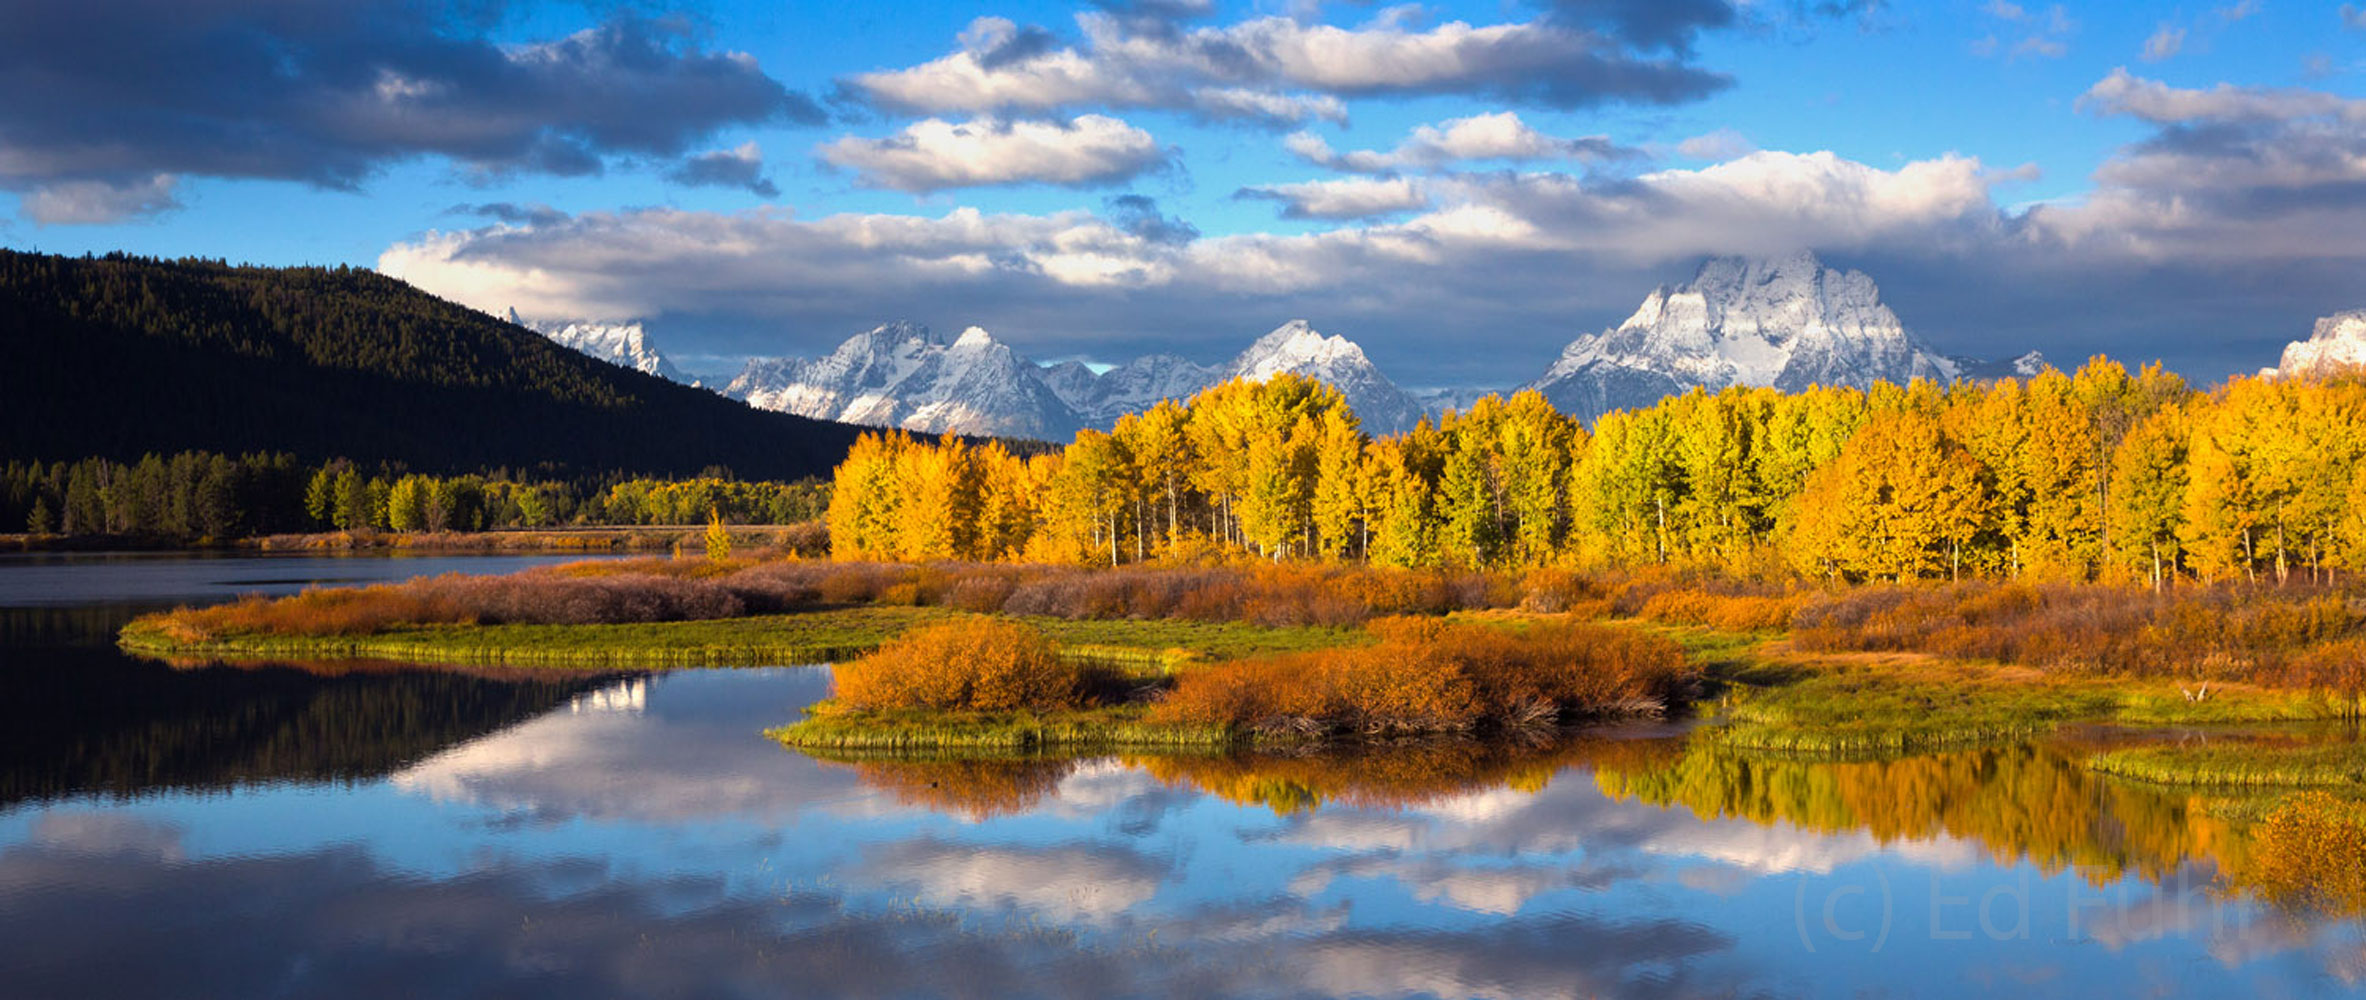 A panorama of Oxbow Bend at peak fall foliage following a surprise snow on the mountains.